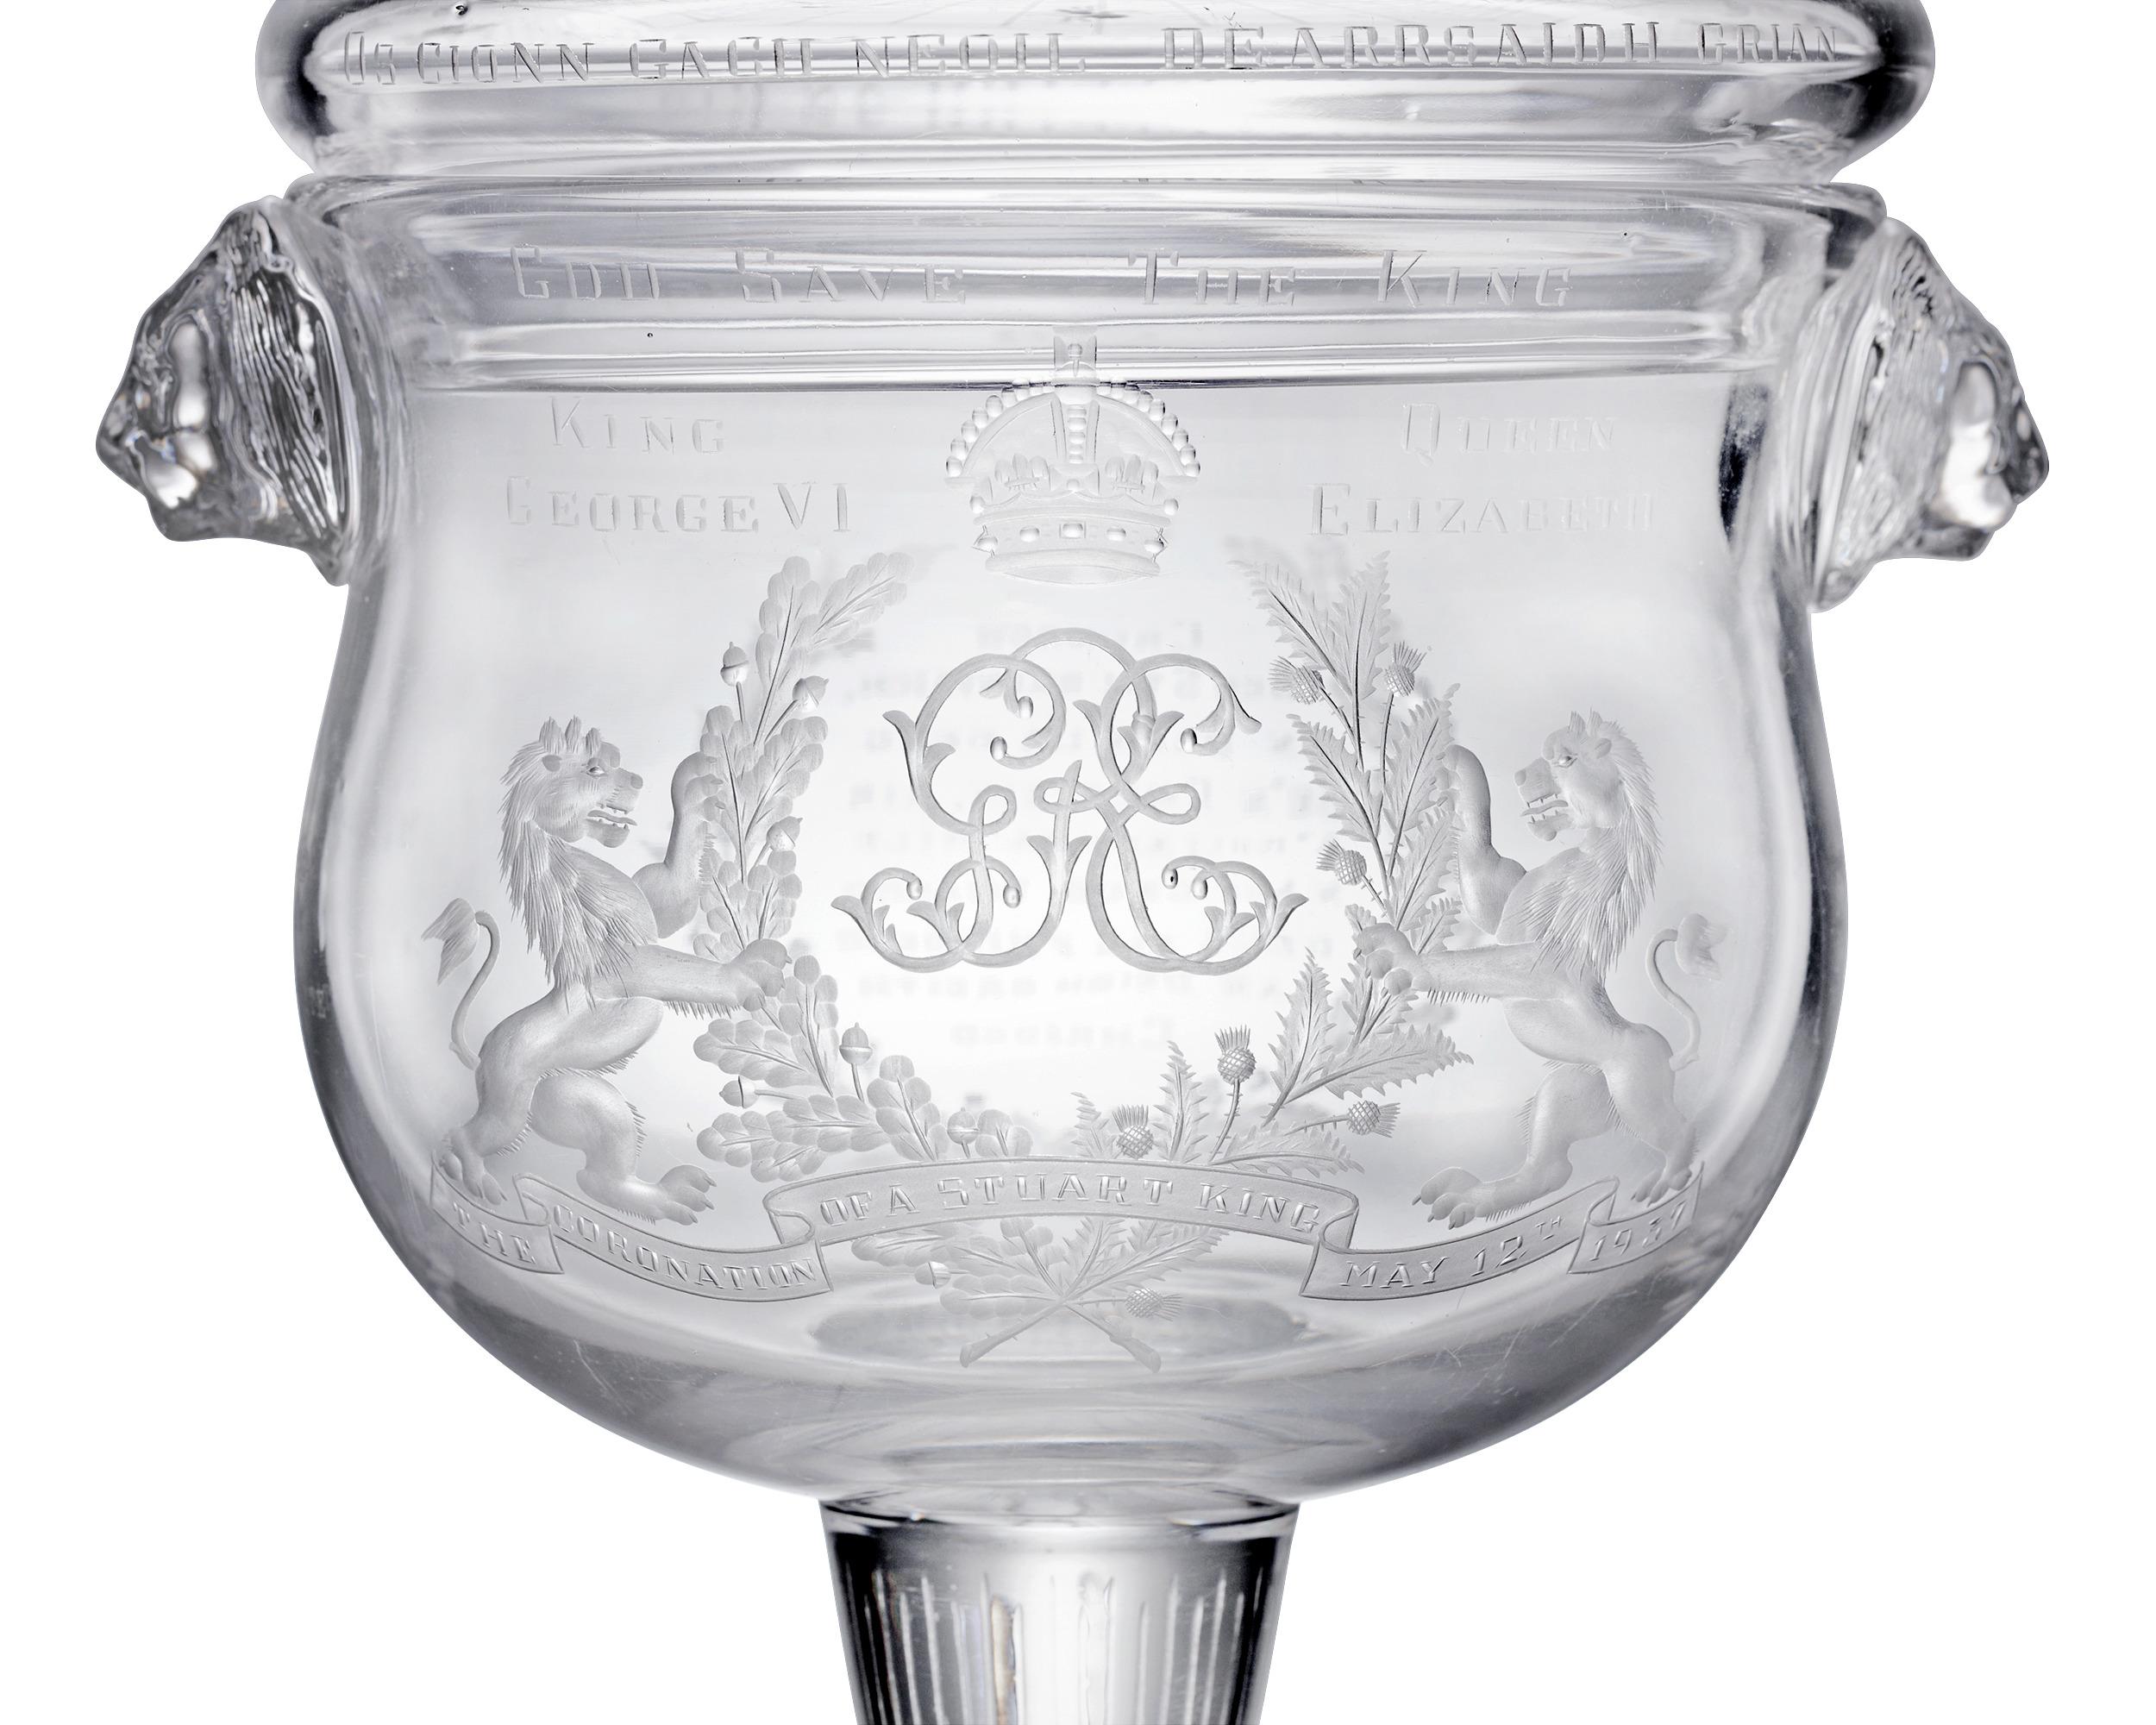 Other George VI Commemorative Coronation Goblet For Sale